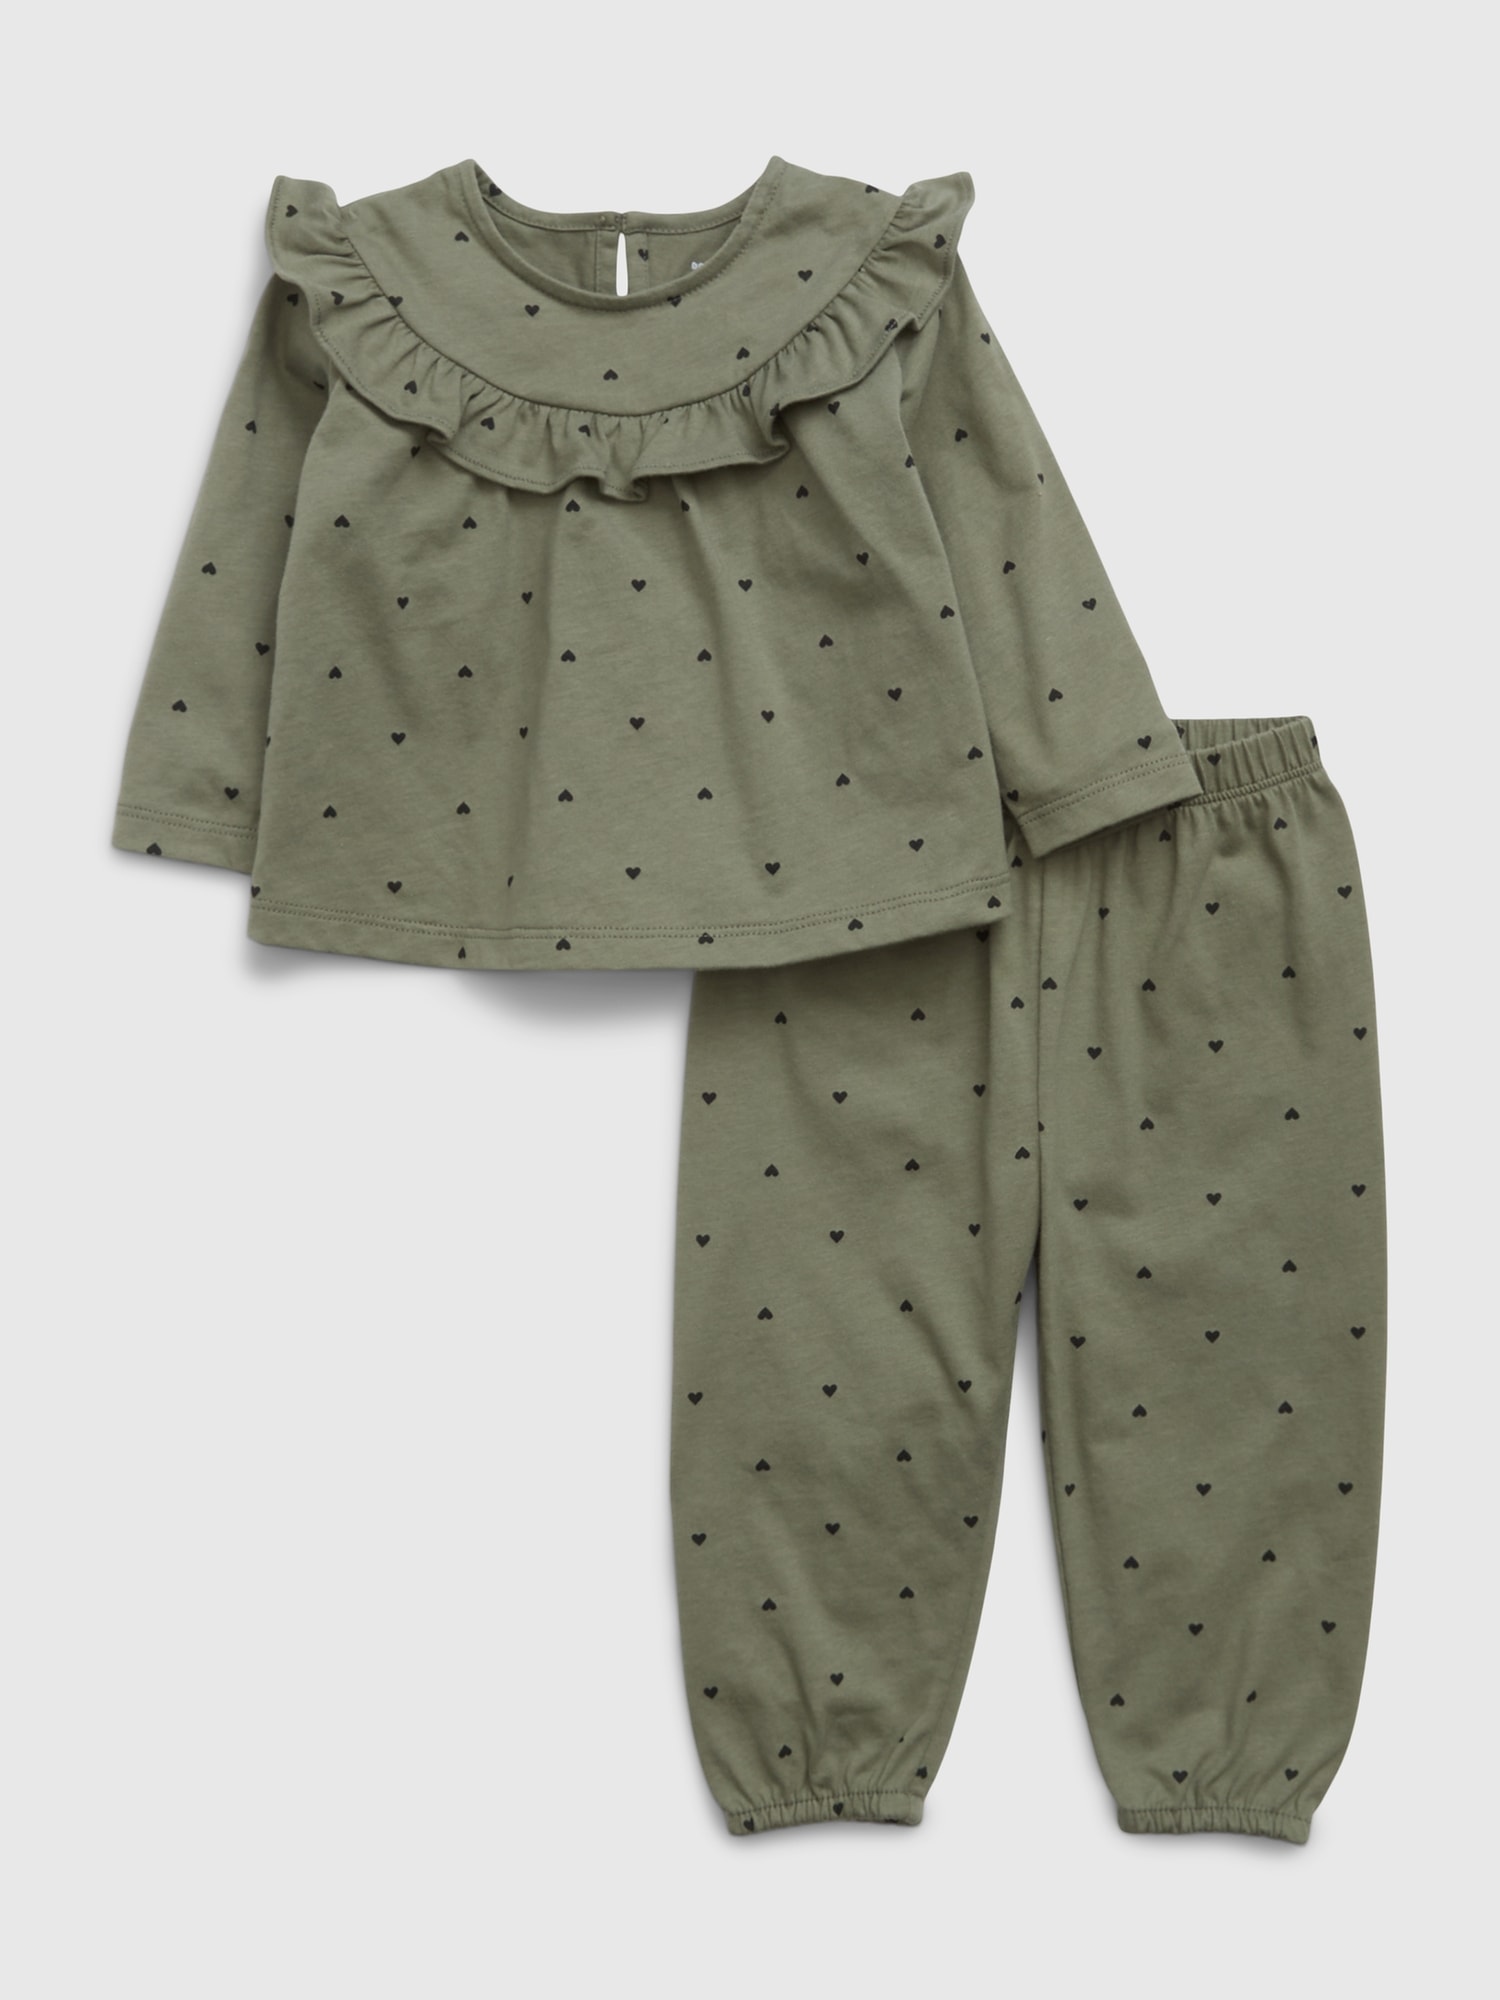 Baby First Favorites 100% Organic Cotton Ruffle Outfit Set | Gap